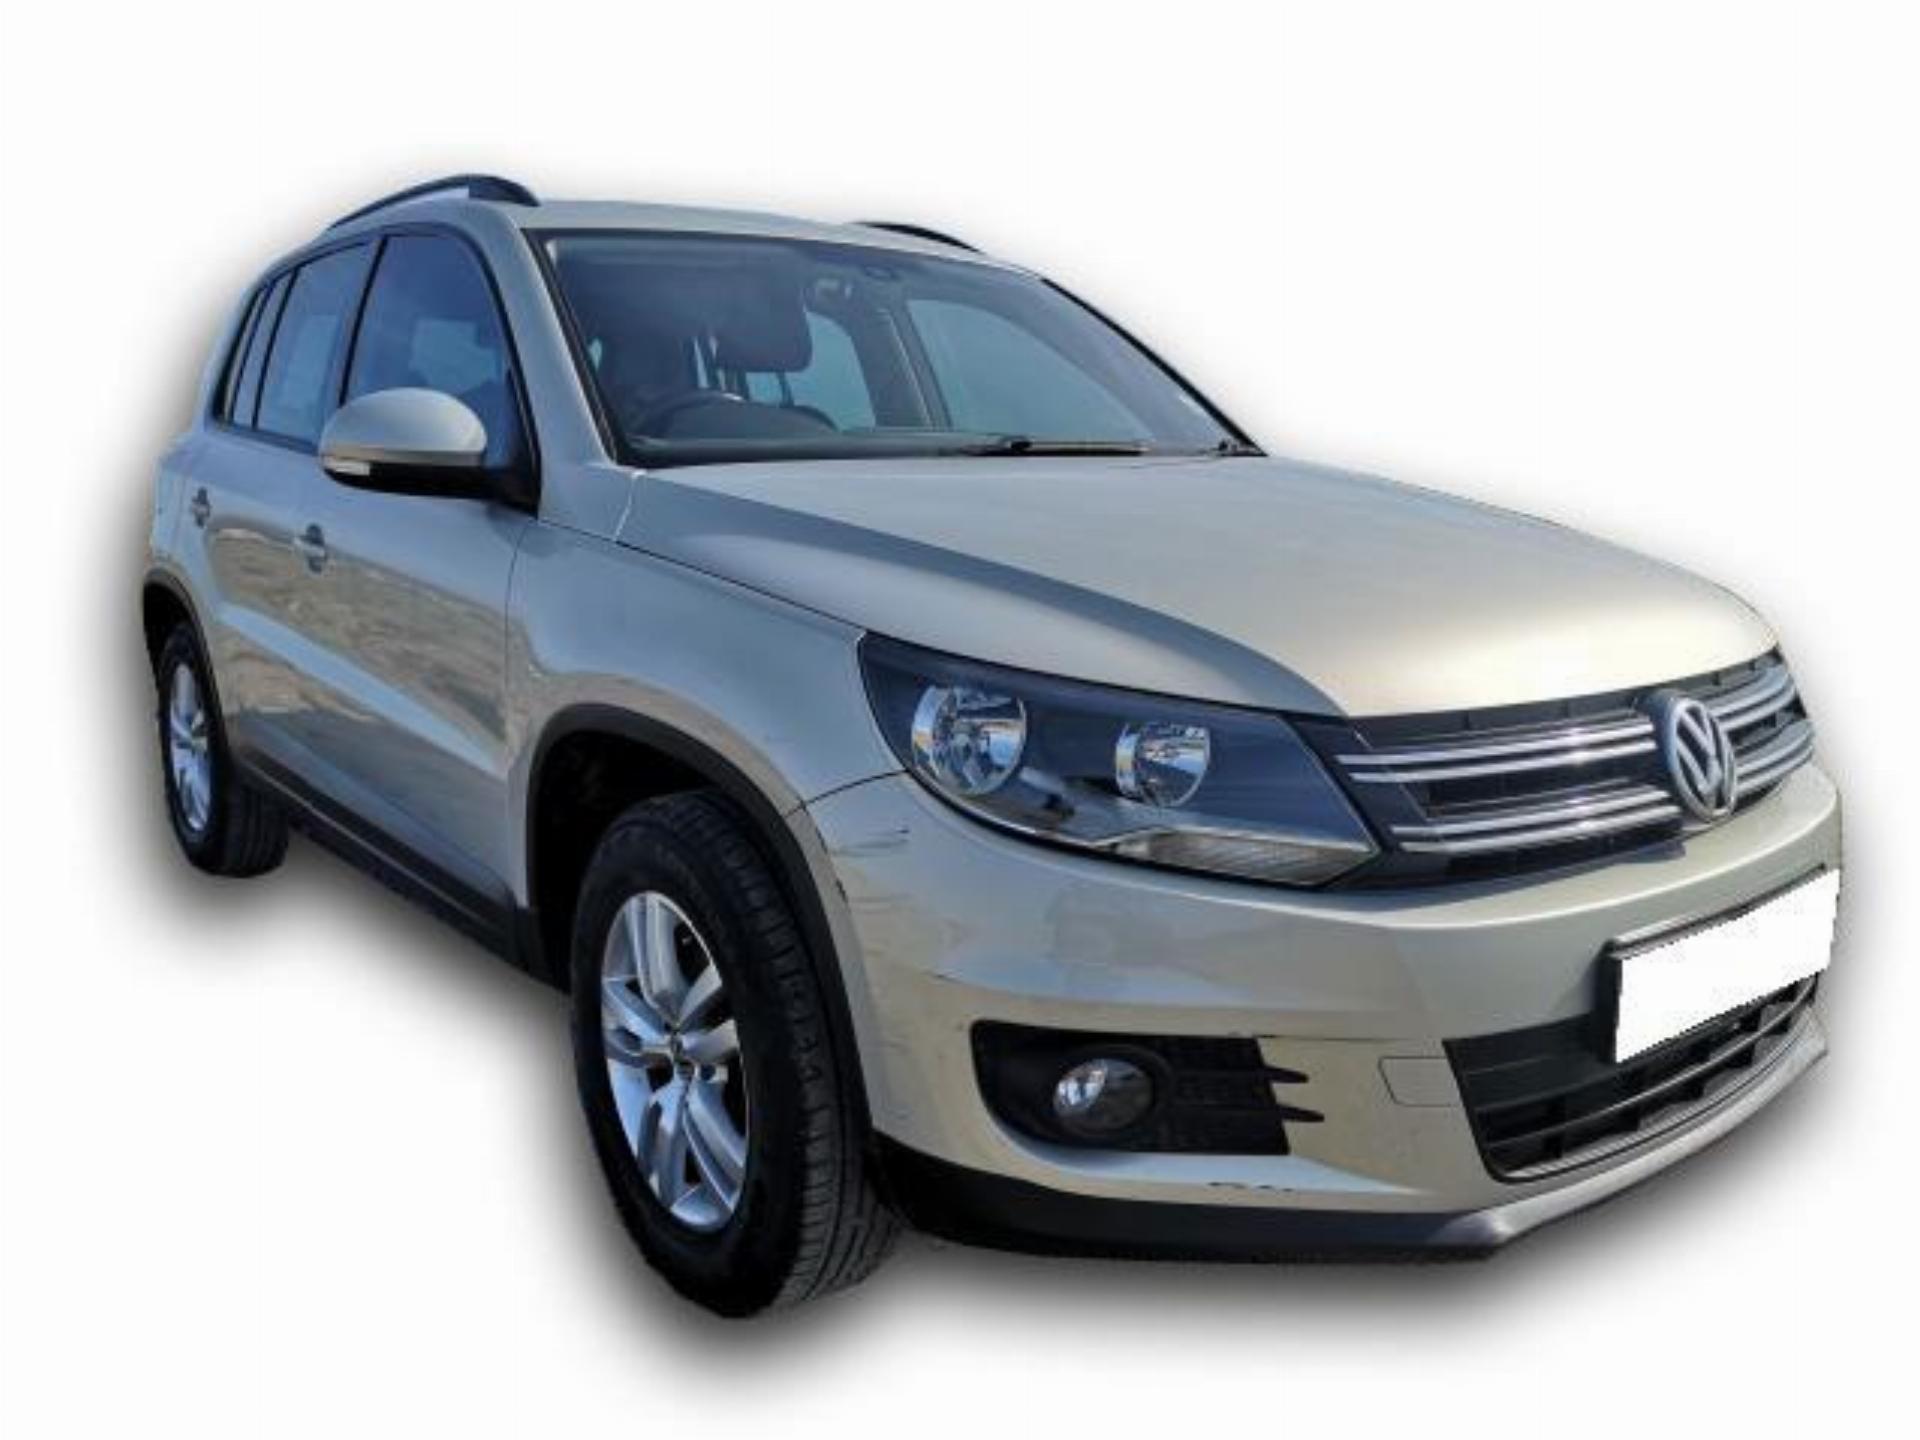 Volkswagen Tiguan Immaculate CONDITION, One Owner